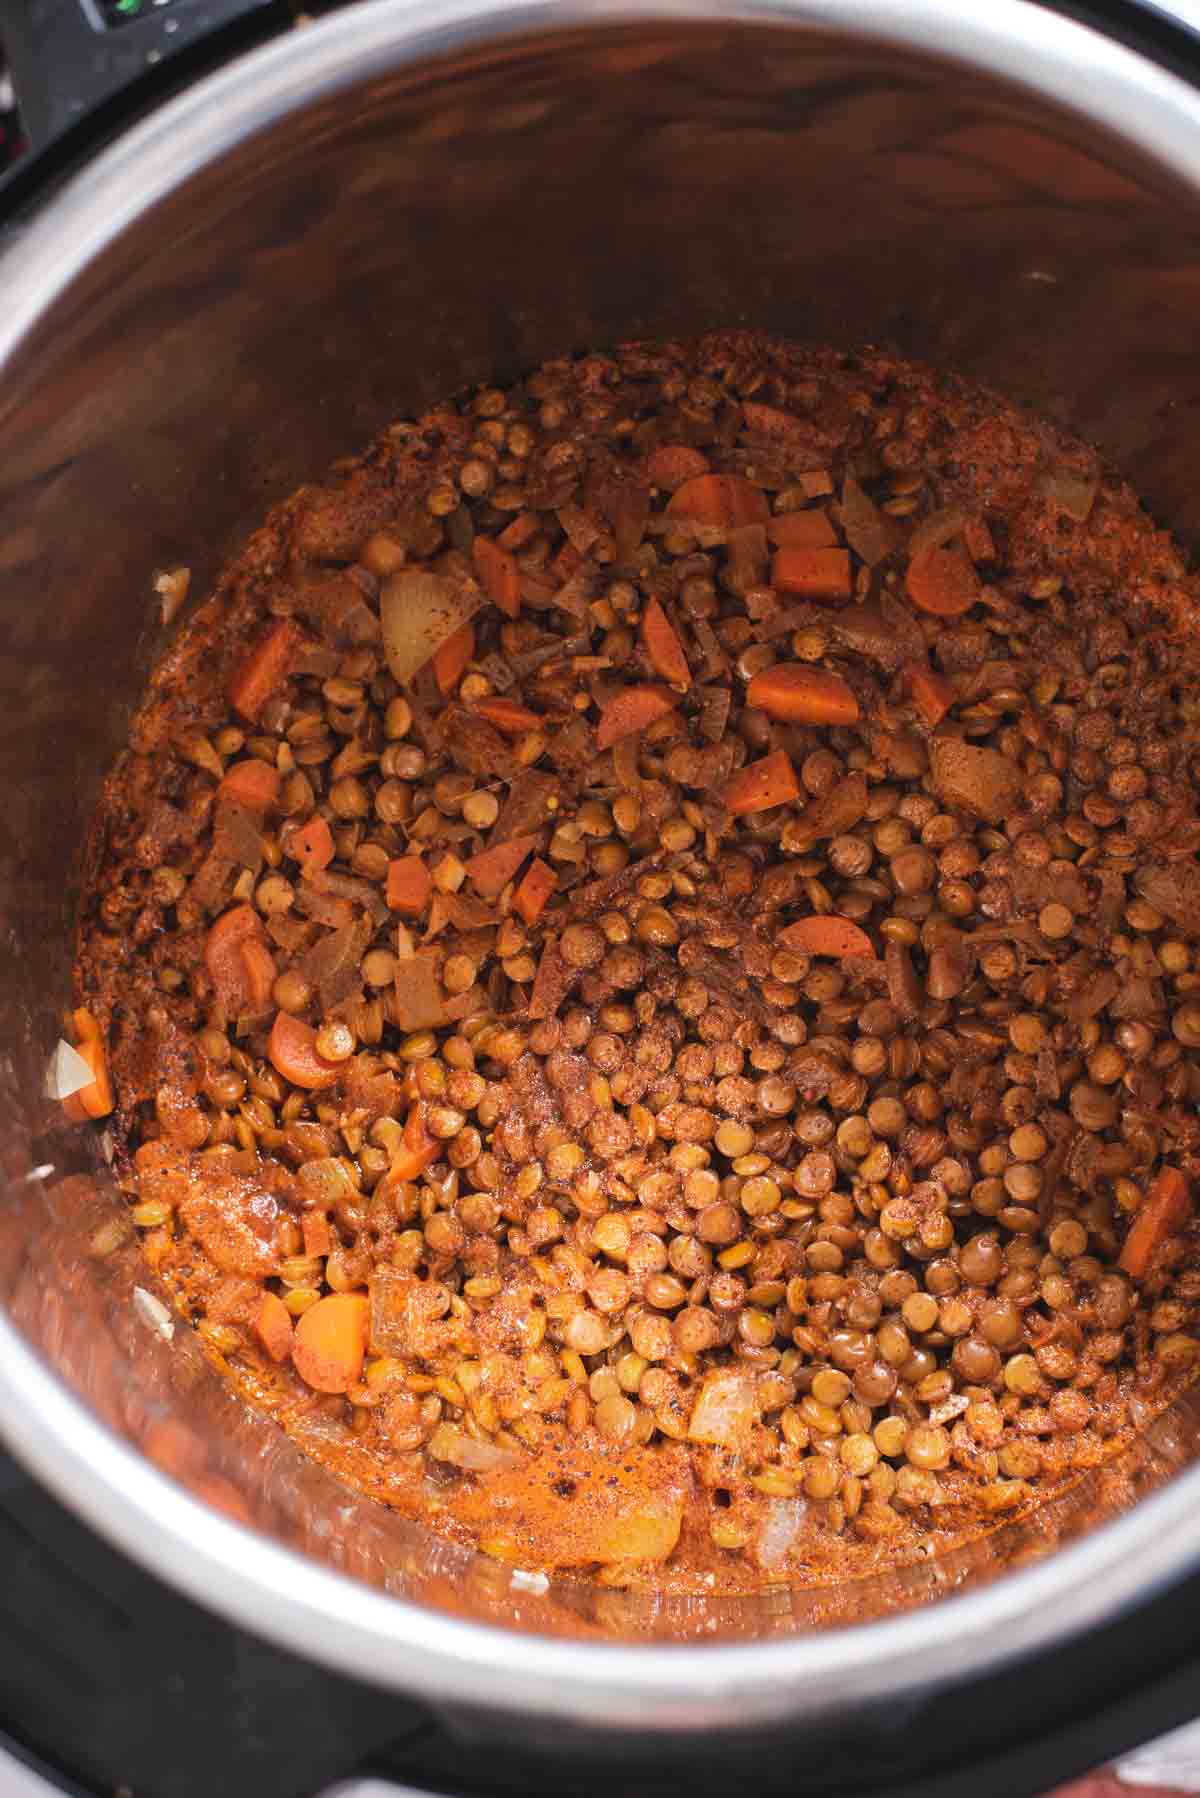 Cooked lentils in the Instant Pot.